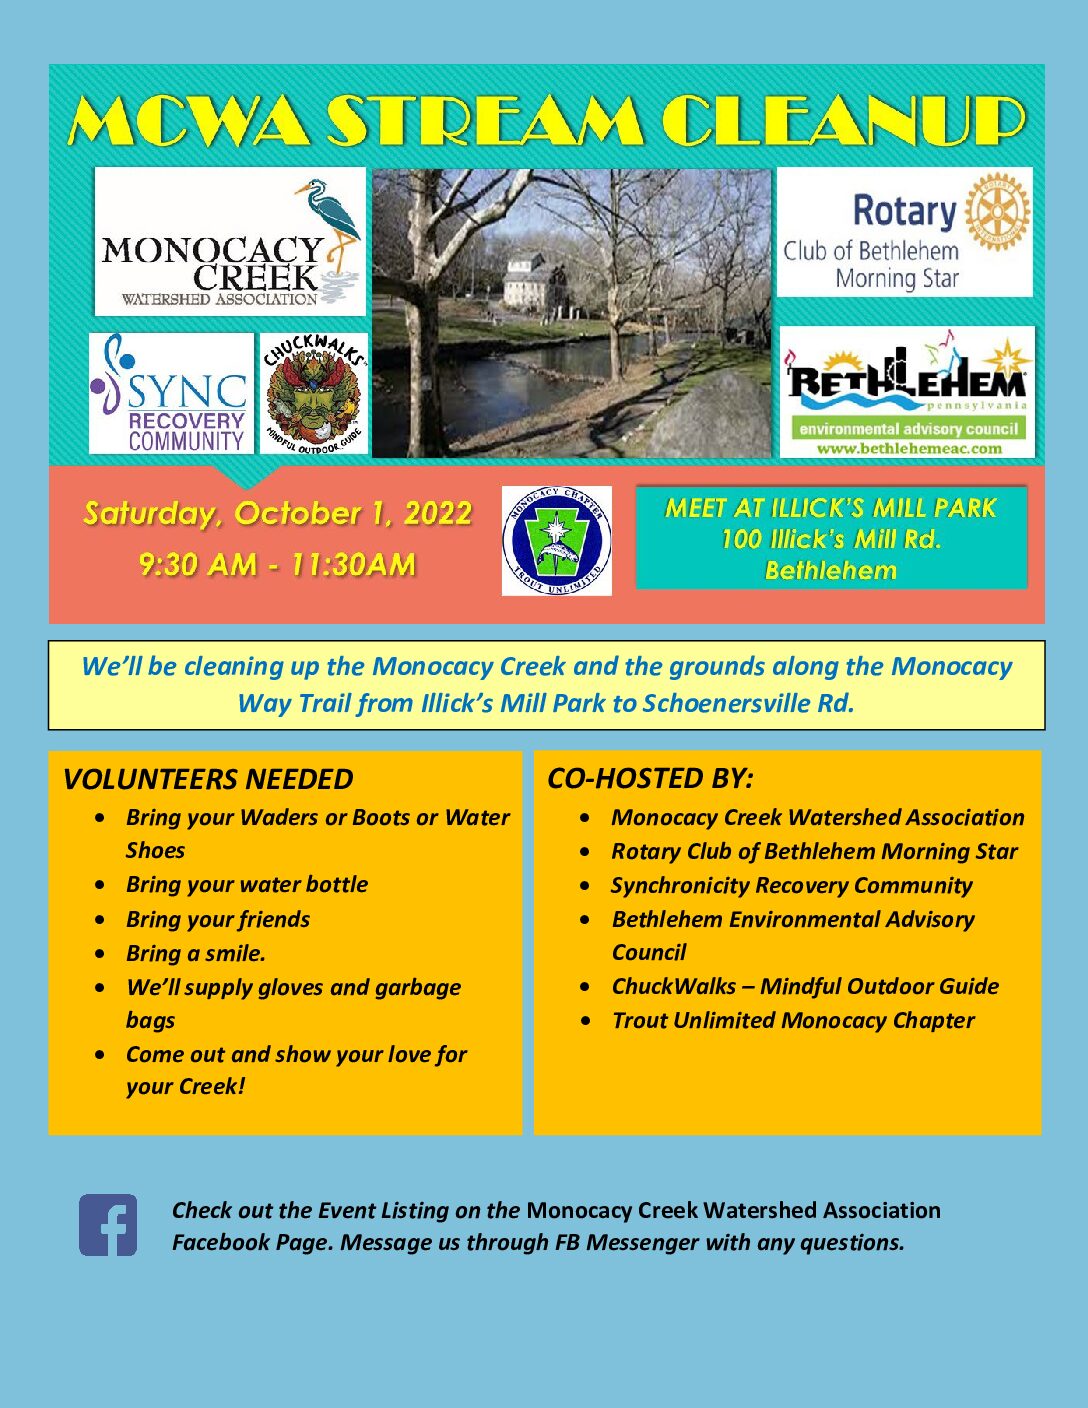 Sync Service Creek Clean Up-Monocacy Creek Watershed Association